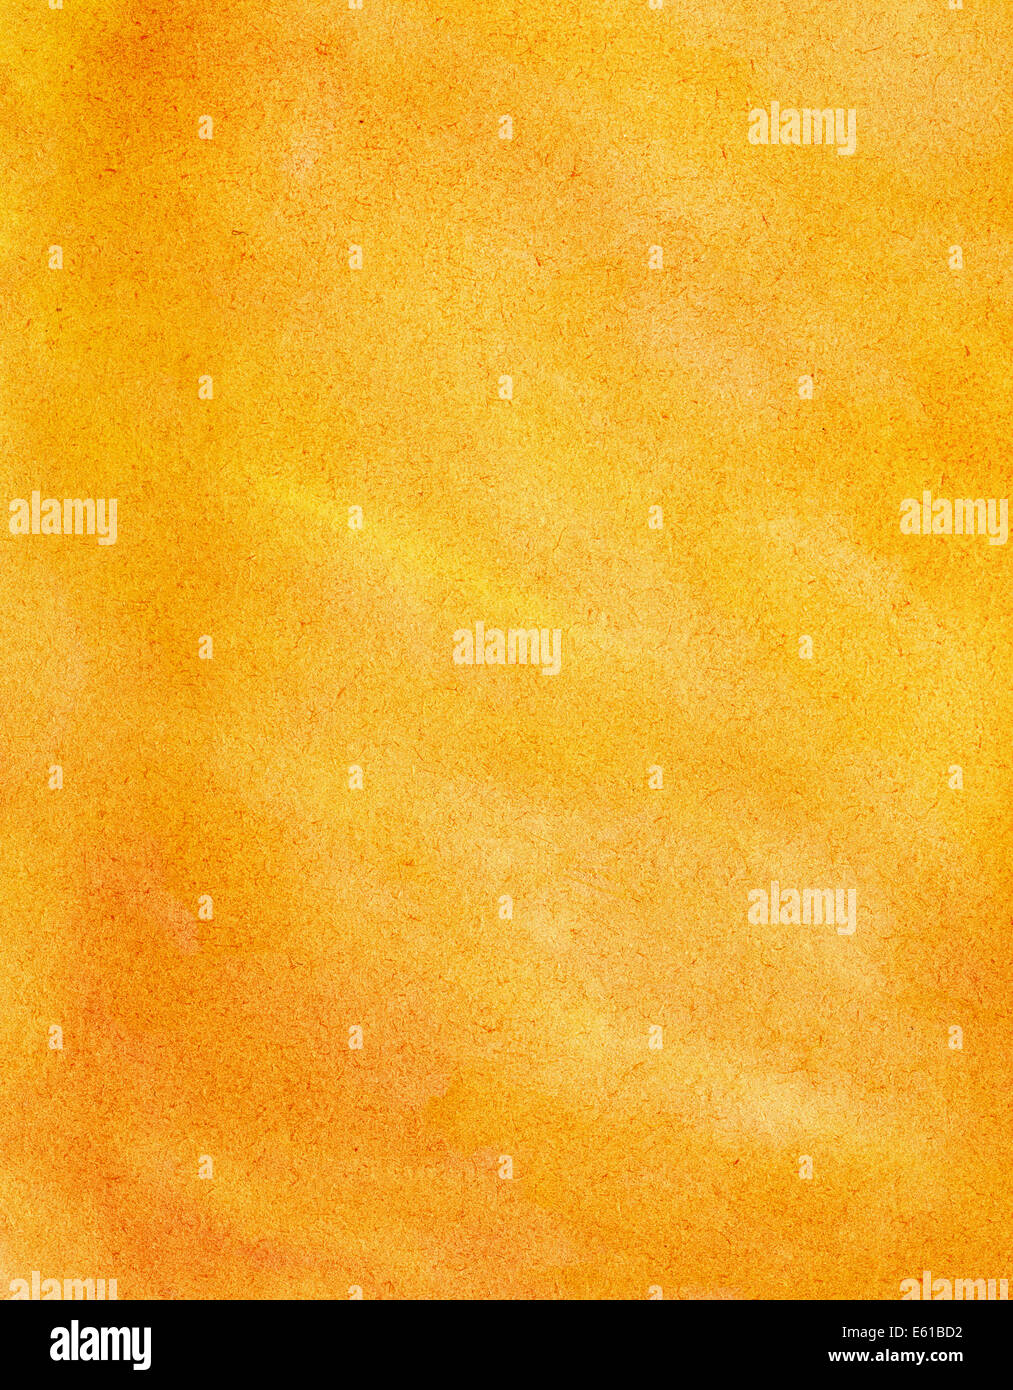 Abstract orange watercolor background. Stock Photo